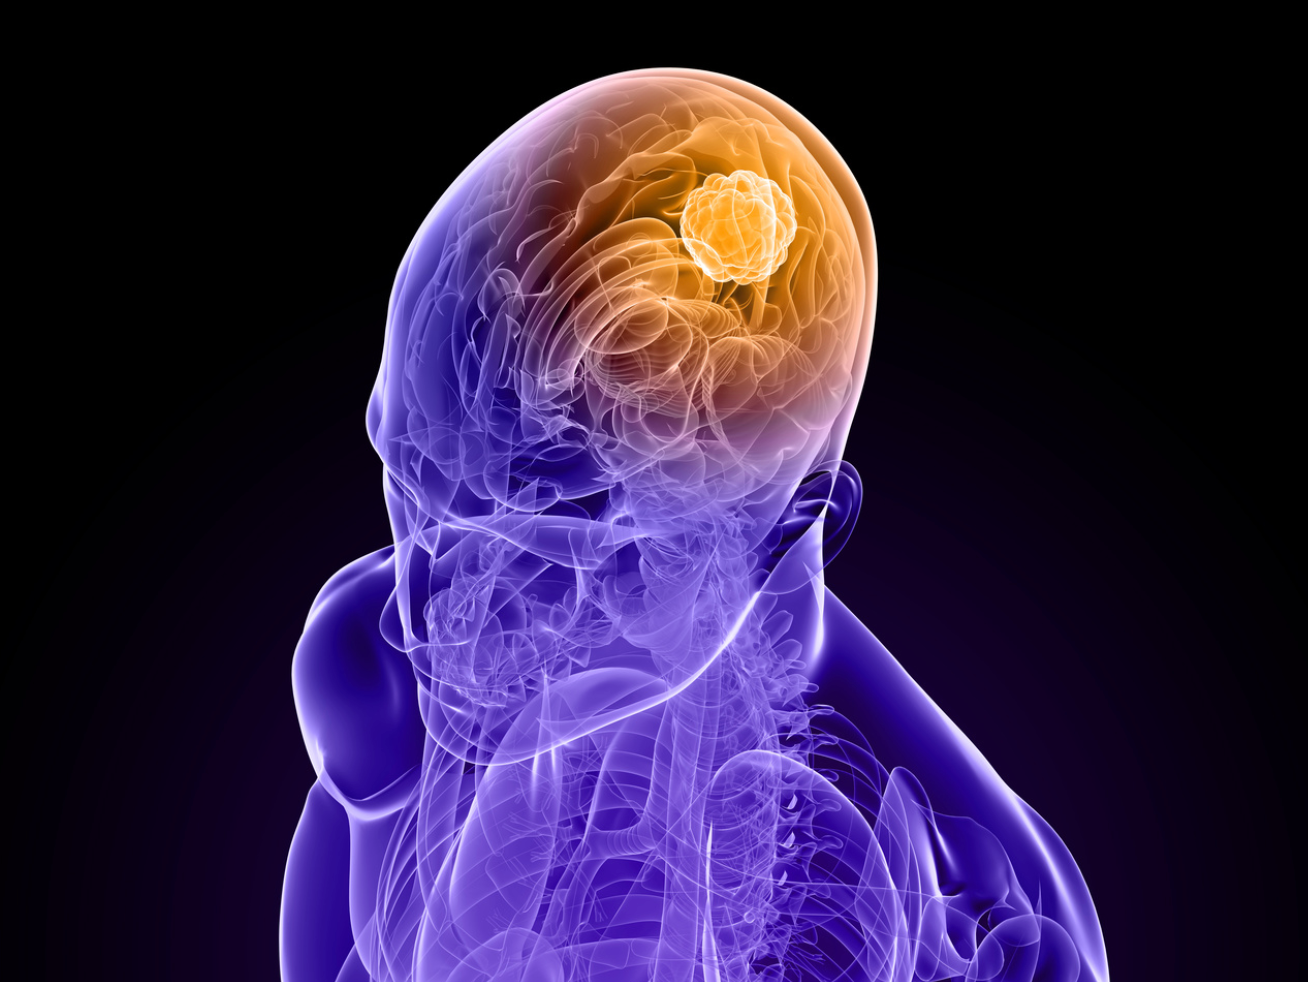 Recurrent Glioblastoma Brain Tumors With Fewer Mutations Respond Better to Immunotherapy